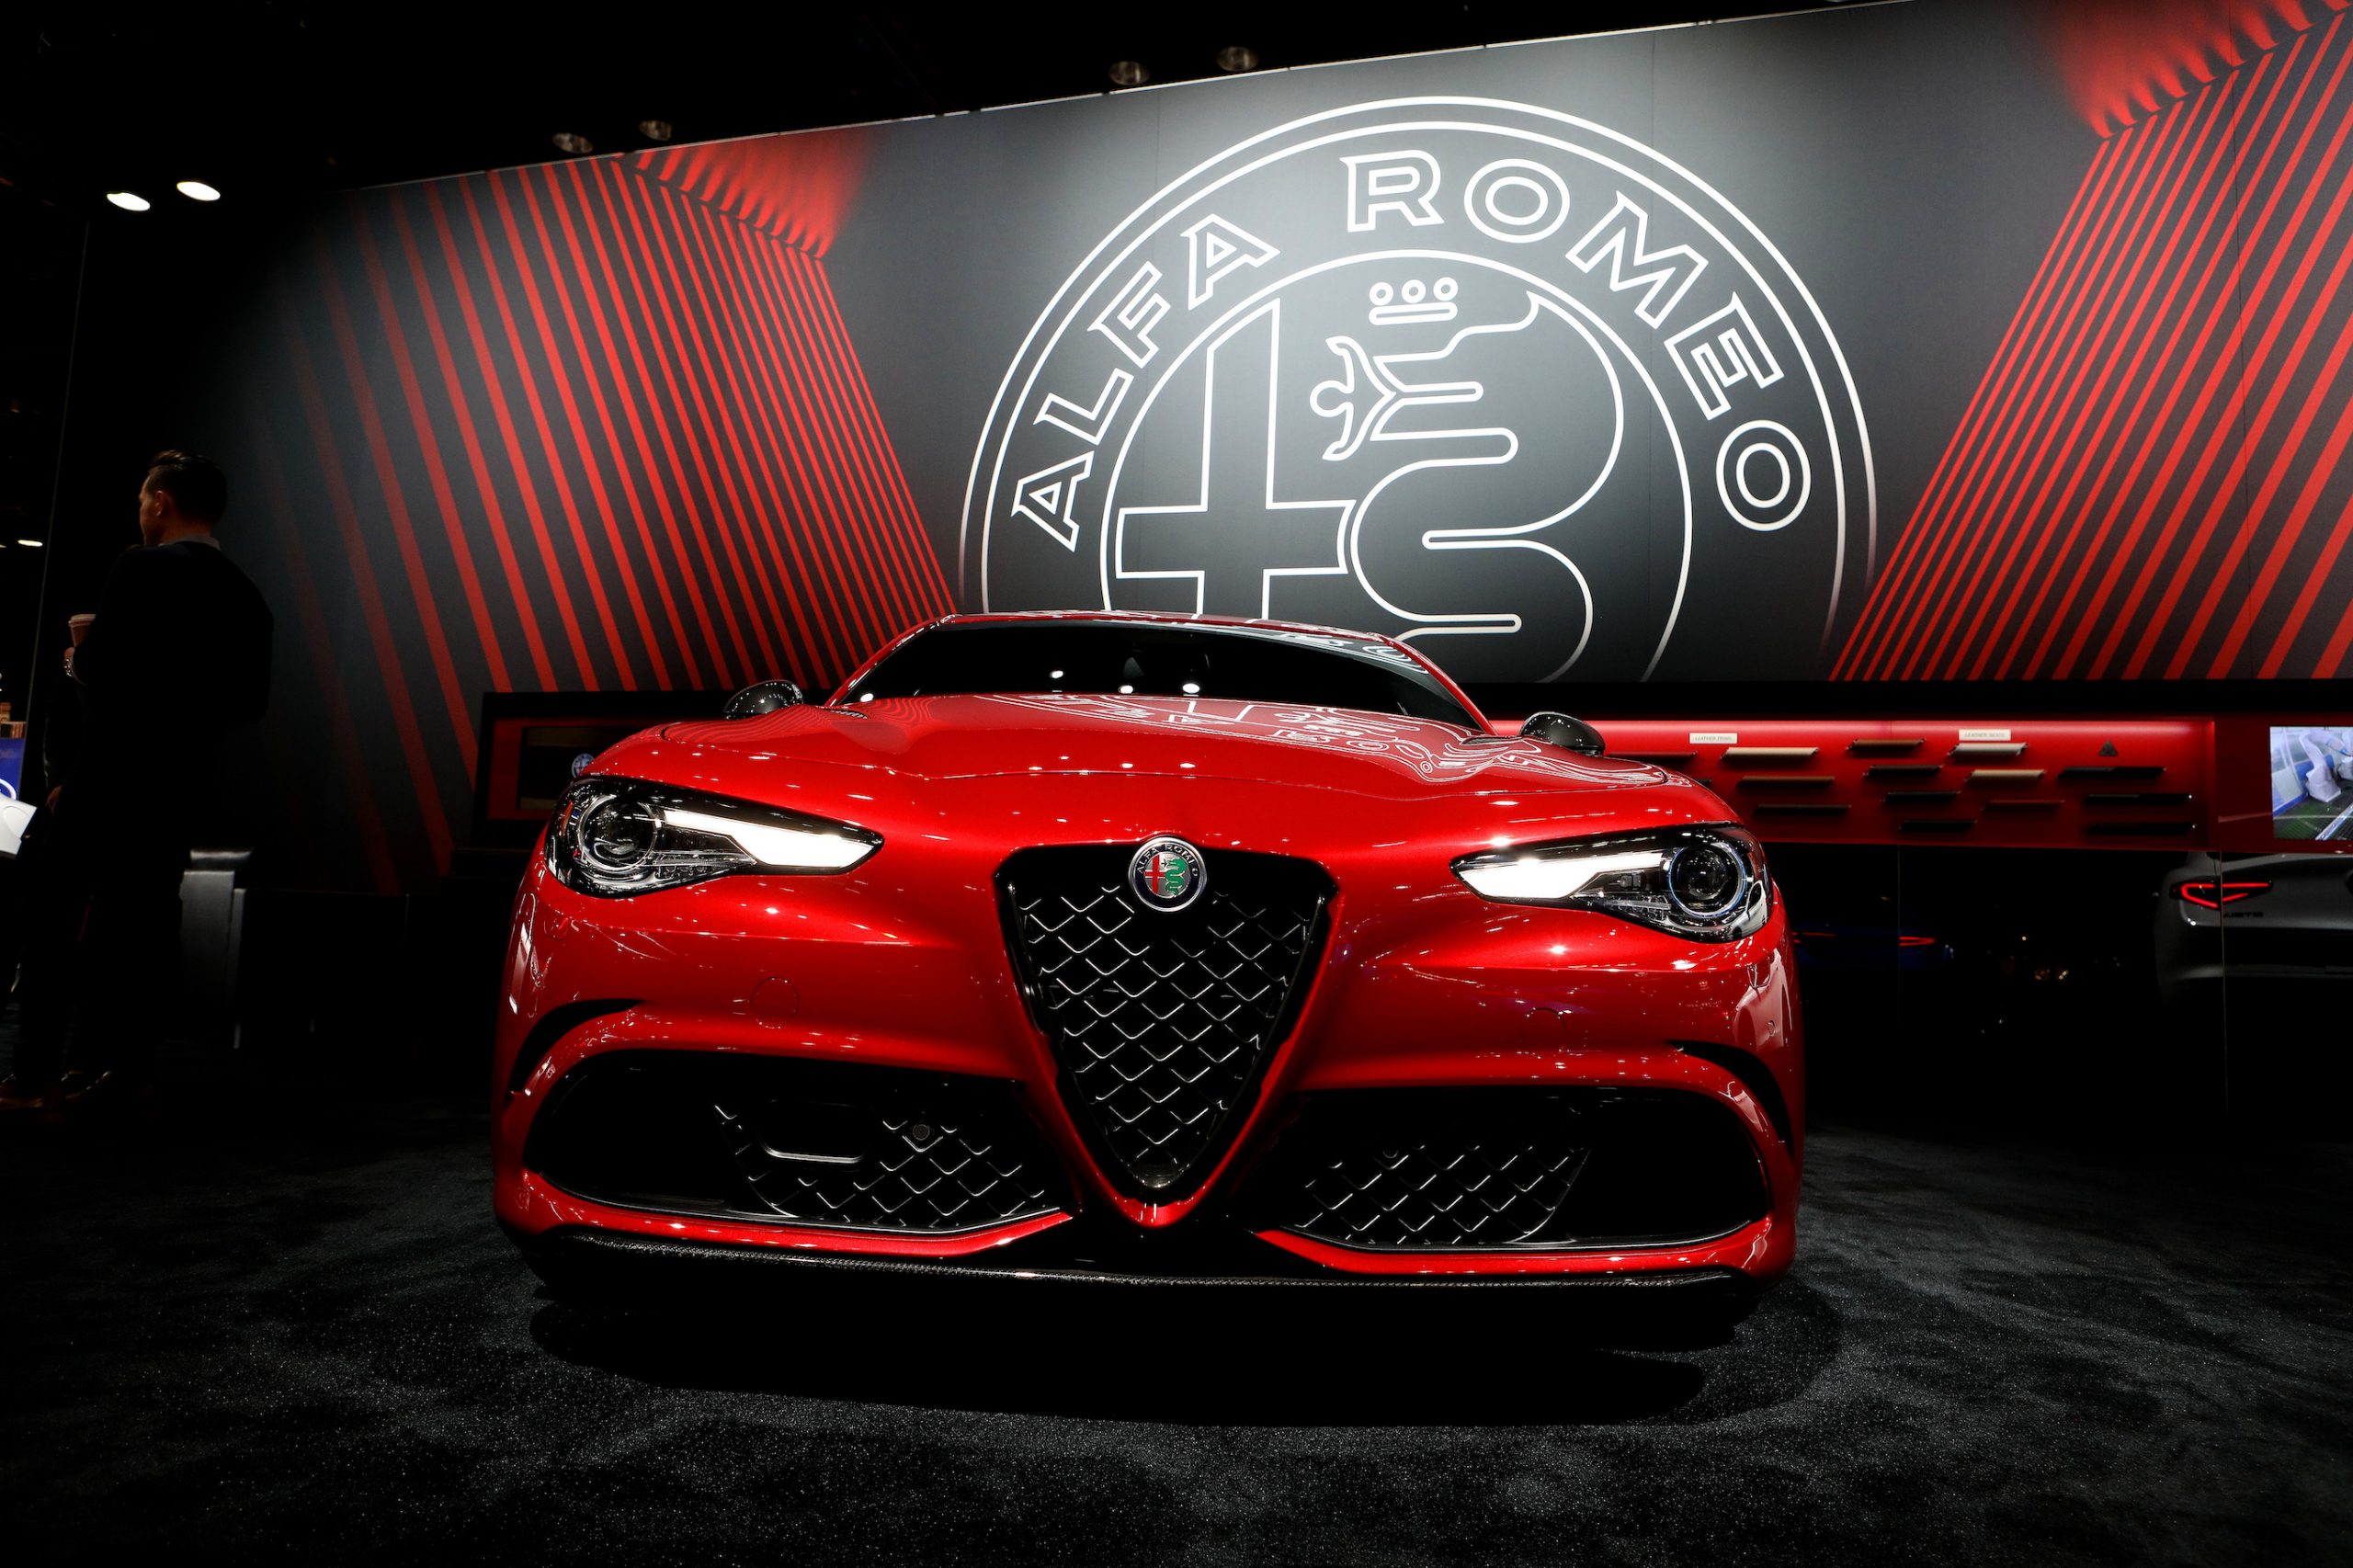 2019 Alfa Romeo Giulia is on display at the 111th Annual Chicago Auto Show at McCormick Place